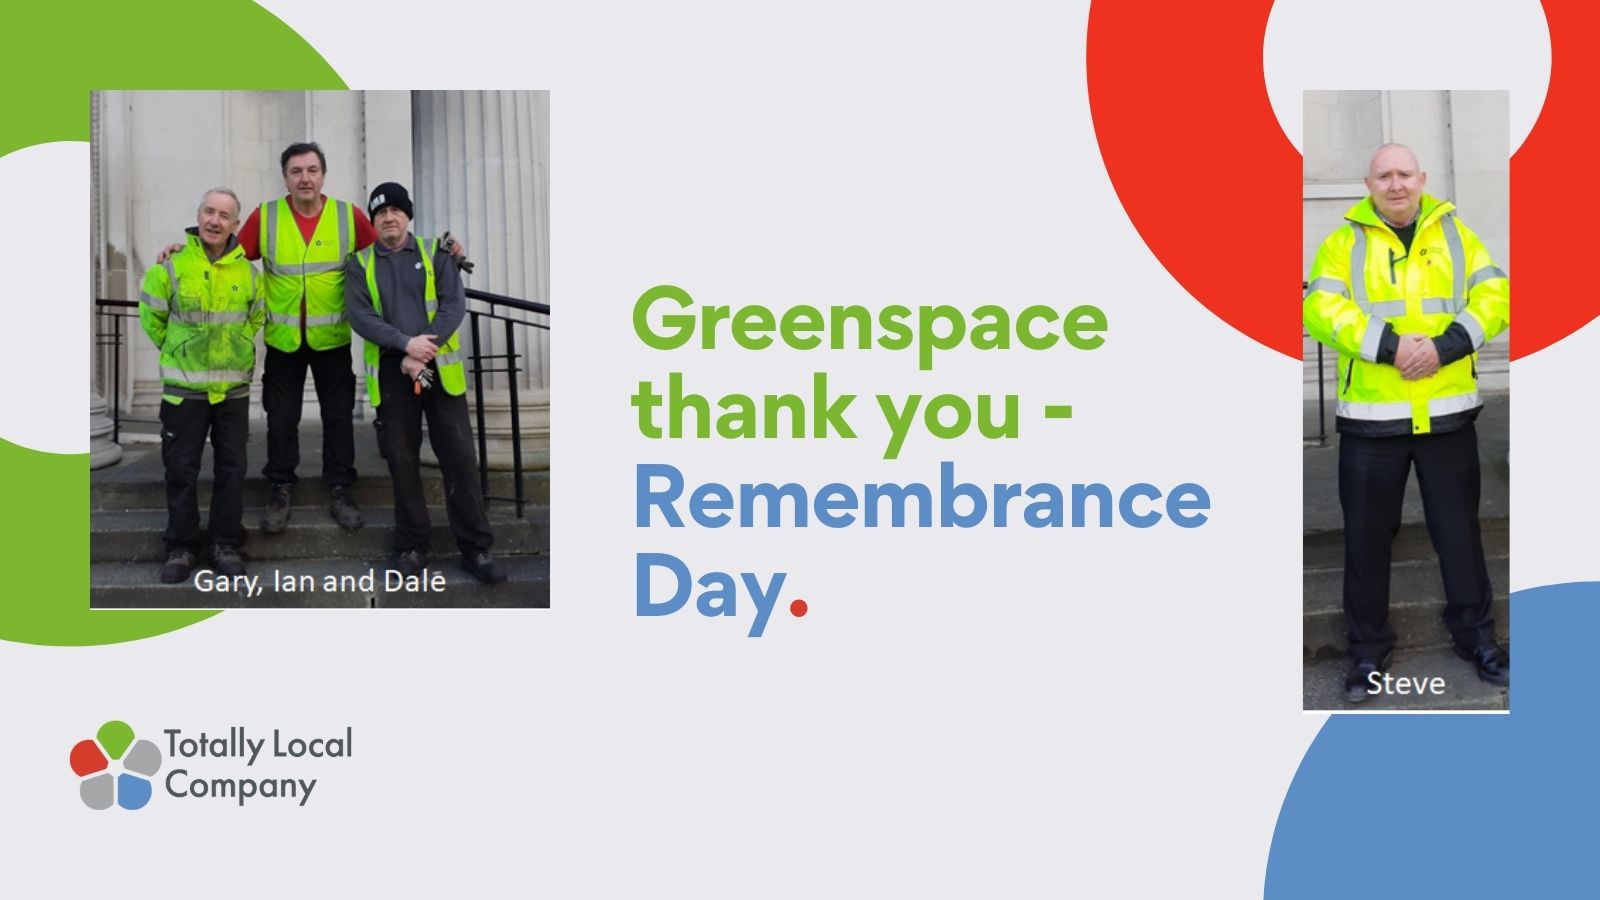 wording - greenspace thank you remembrance day, photos of four members of the team